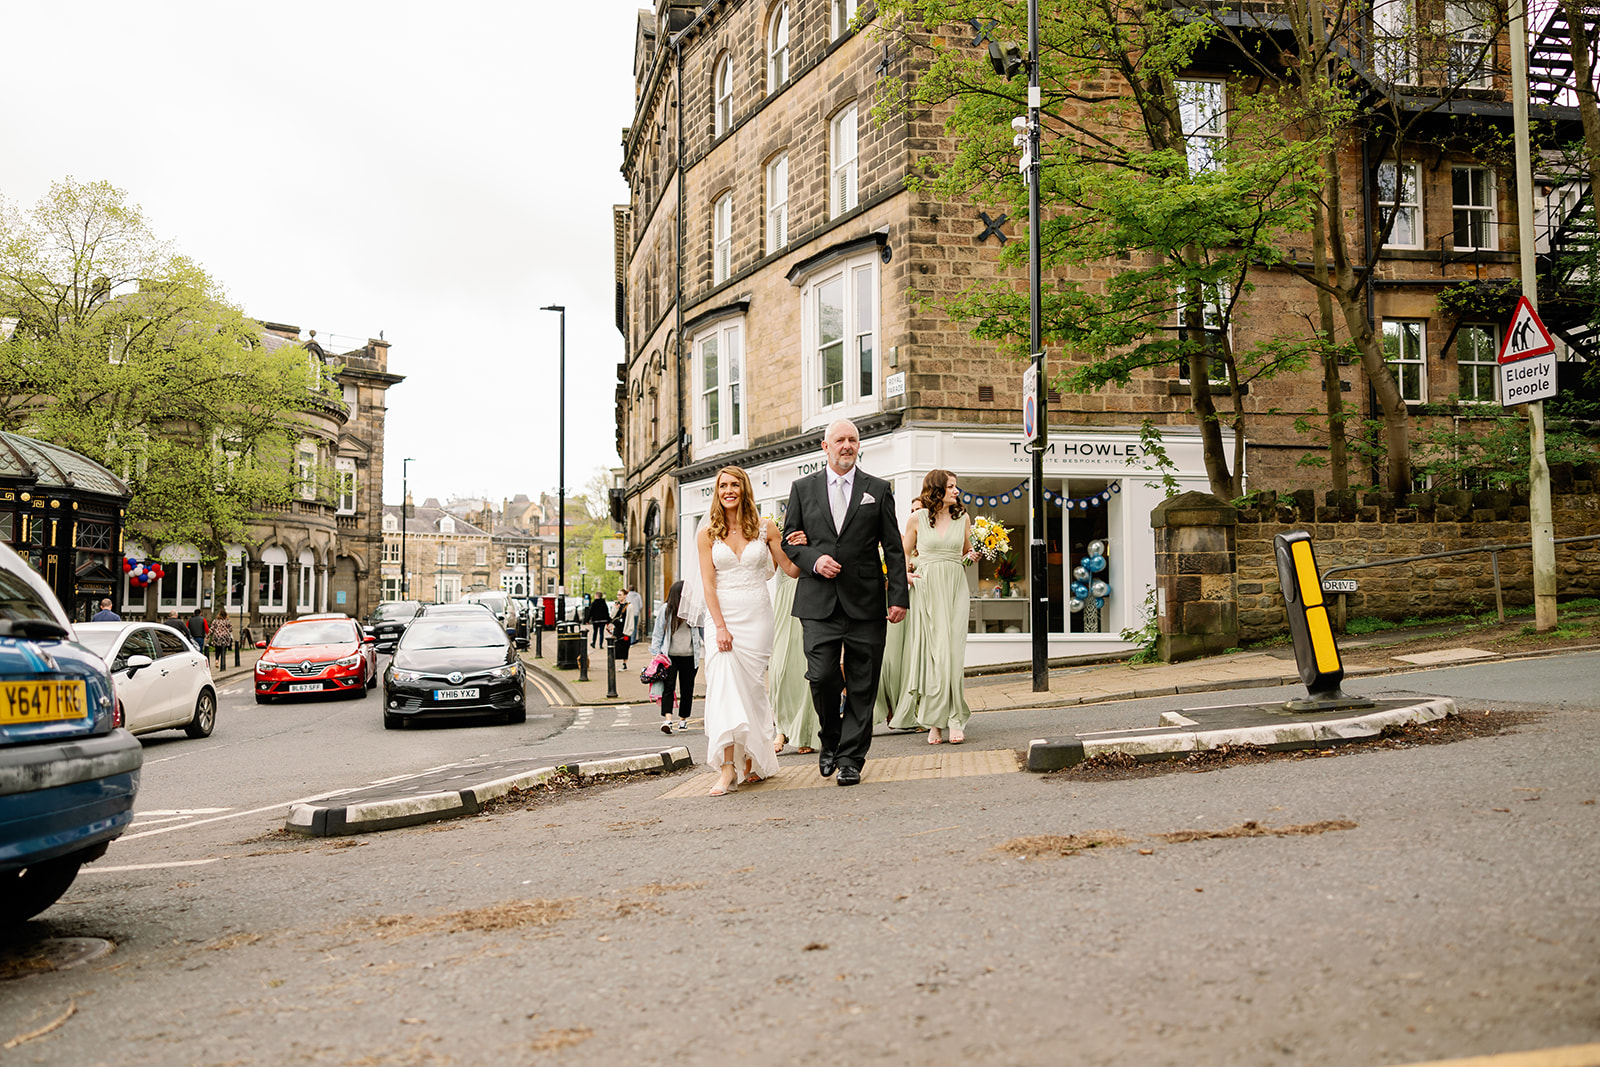 A bride walking through Harrogate in North Yorkshire heading to her wedding ceremony